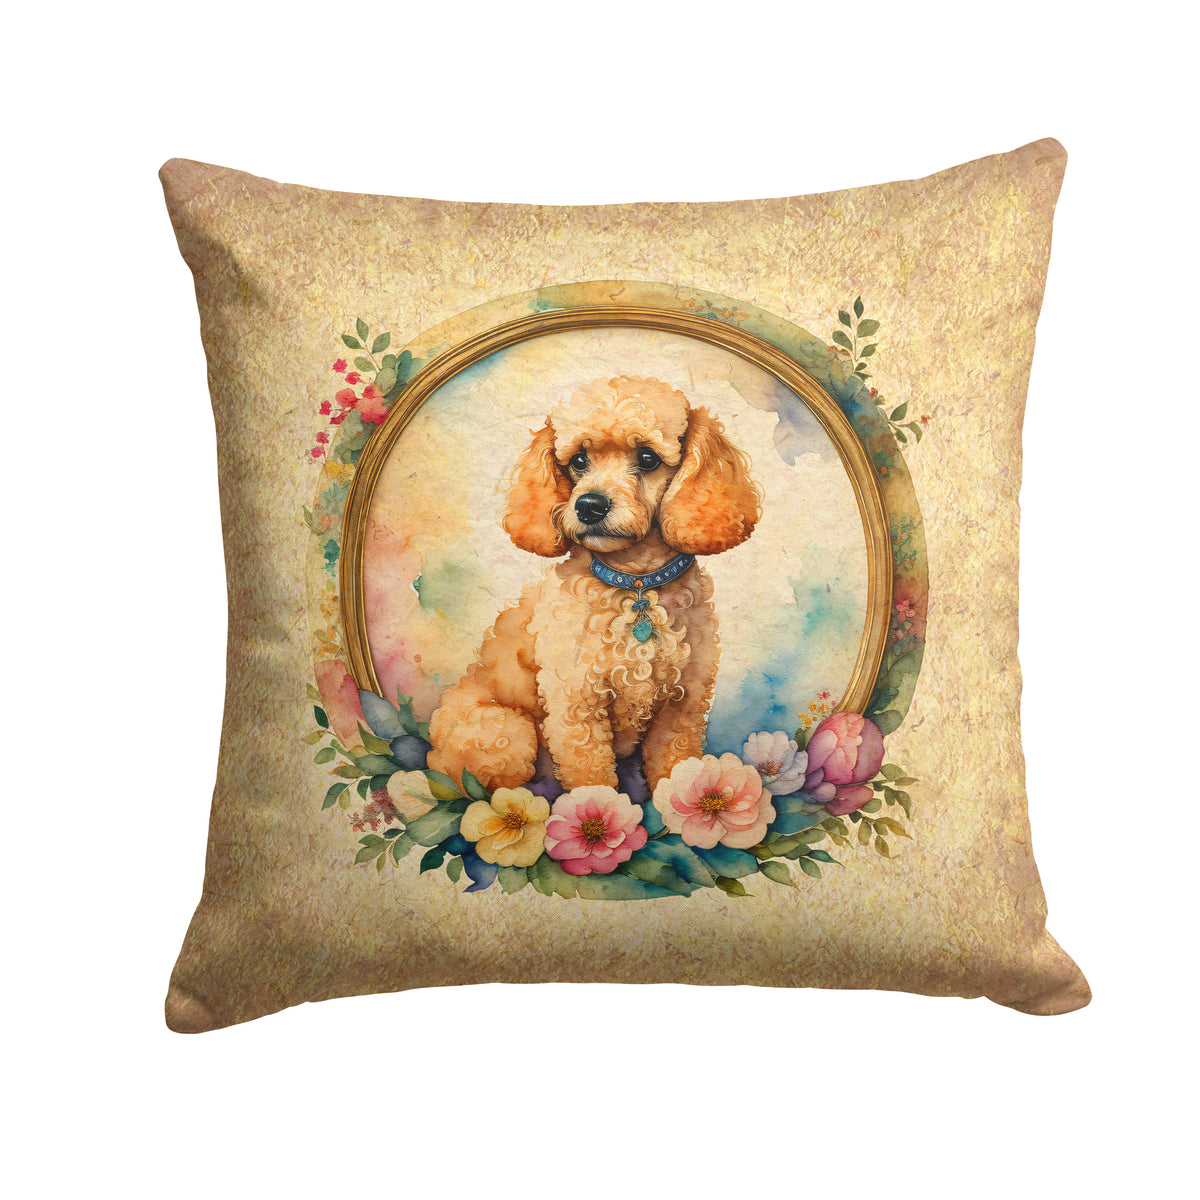 Buy this Poodle and Flowers Fabric Decorative Pillow